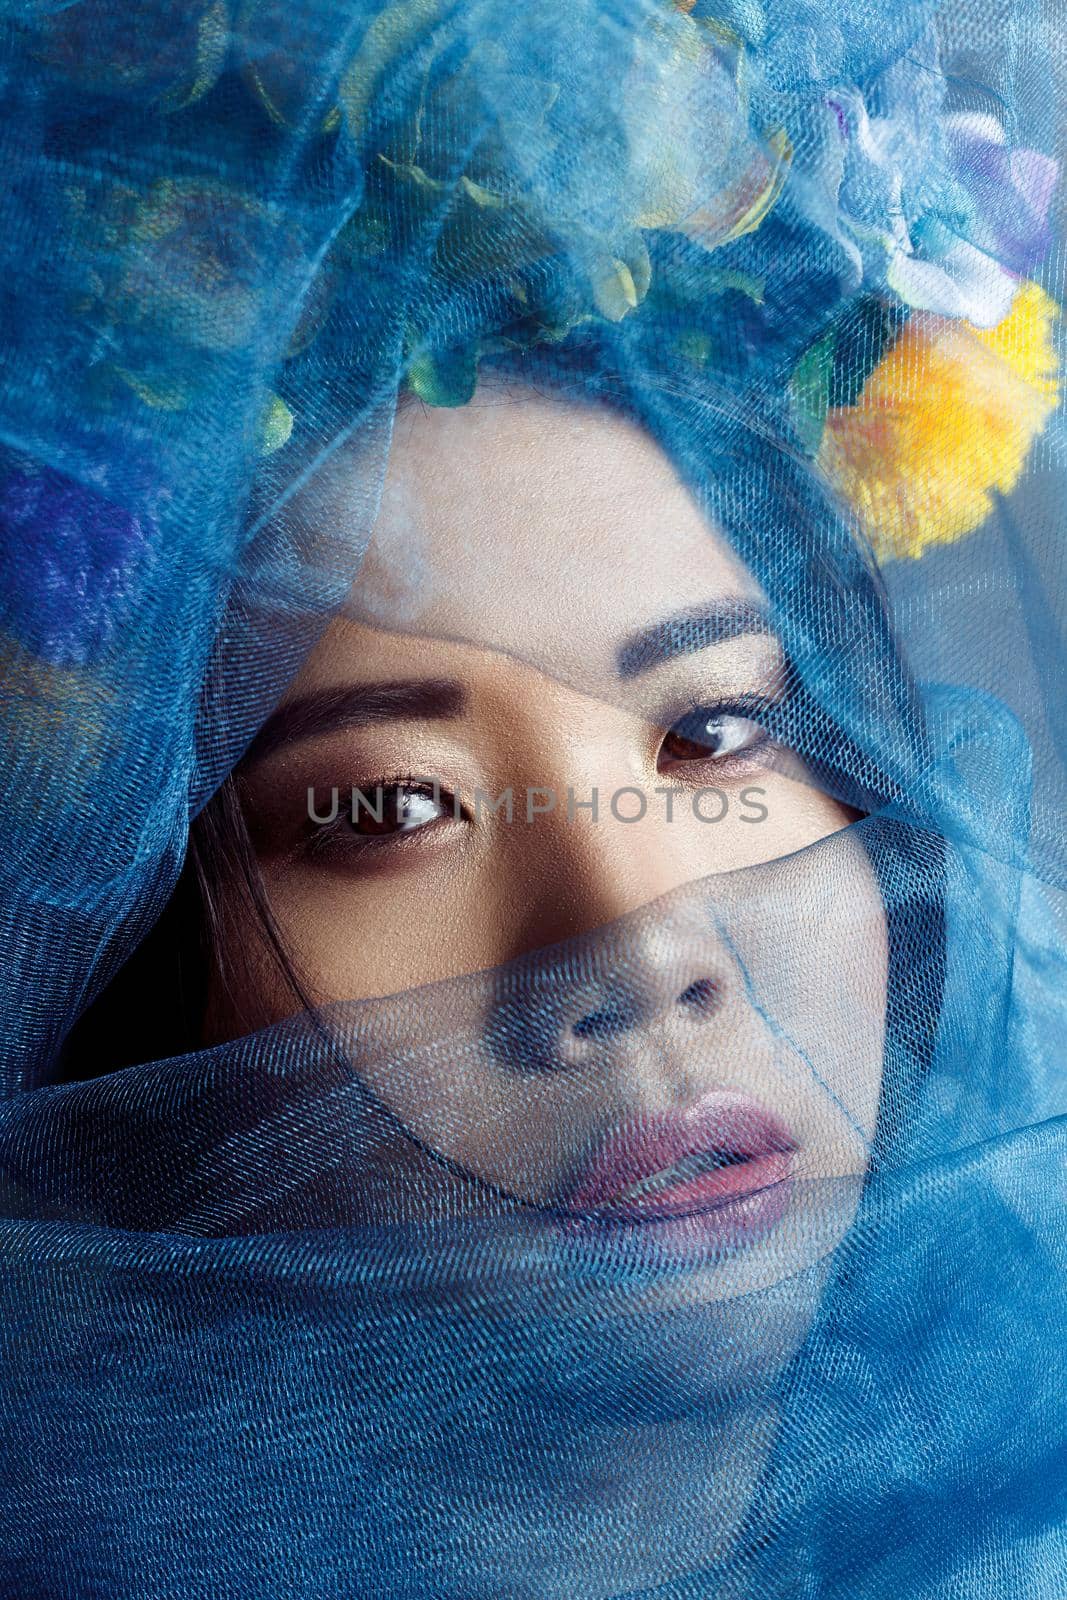 portrait of asian woman with floral hat and blue veil looking at camera on light grey background . indoor studio shot.